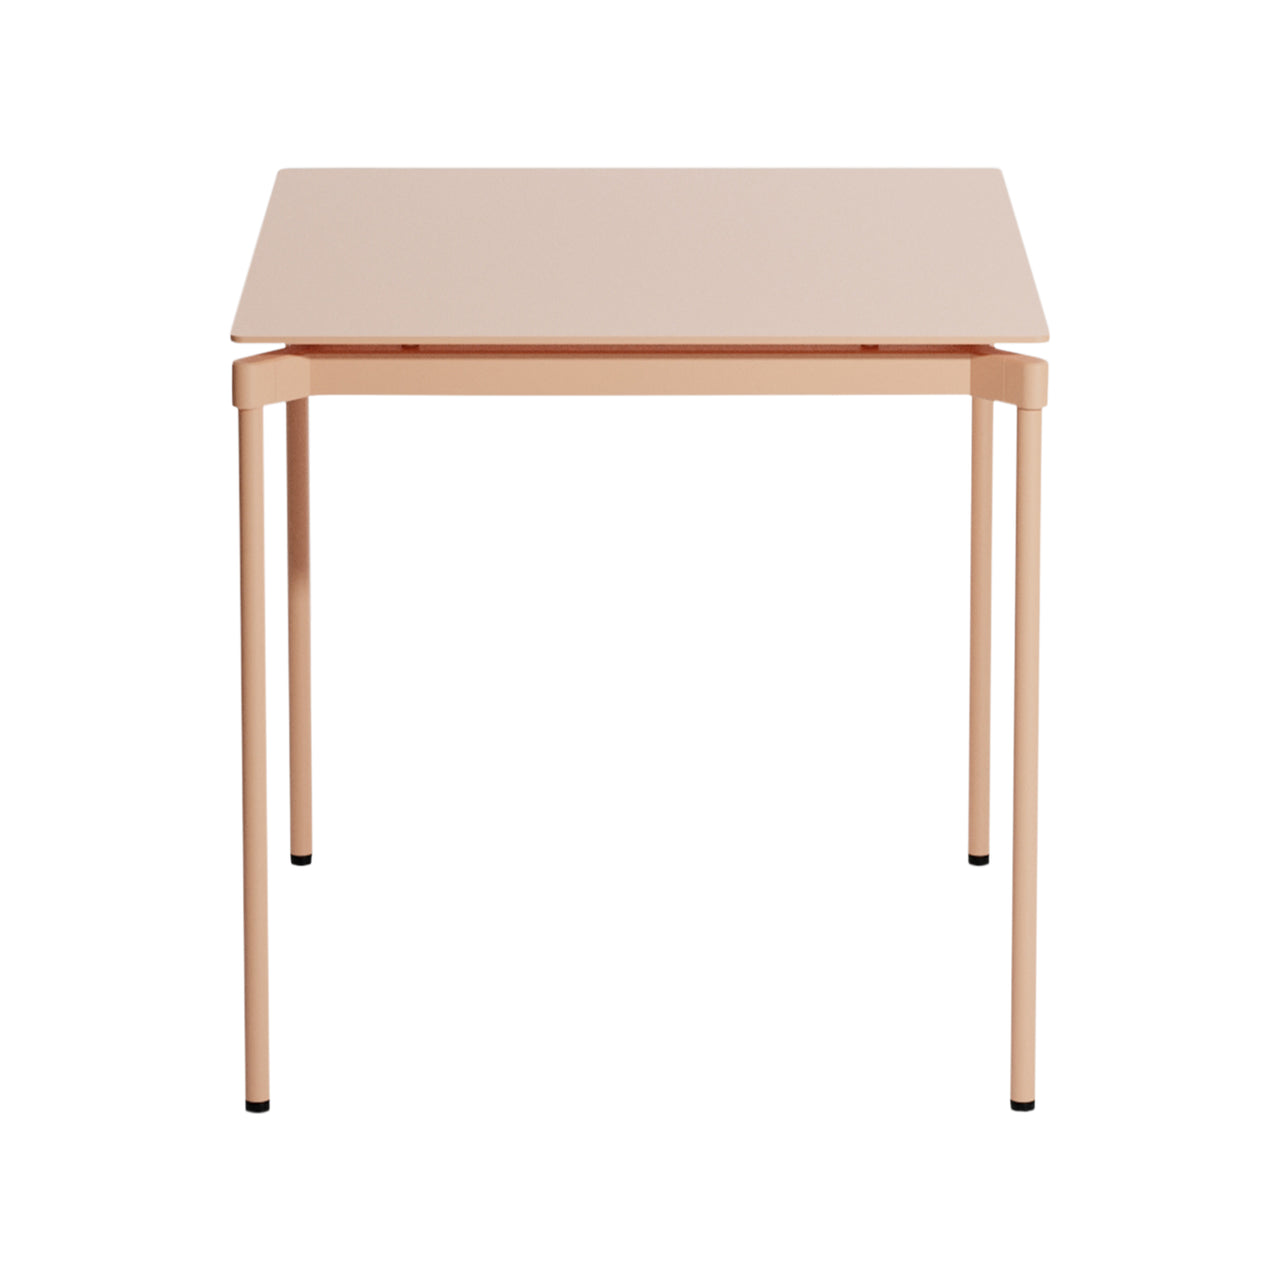 Fromme Dining Table: Blush